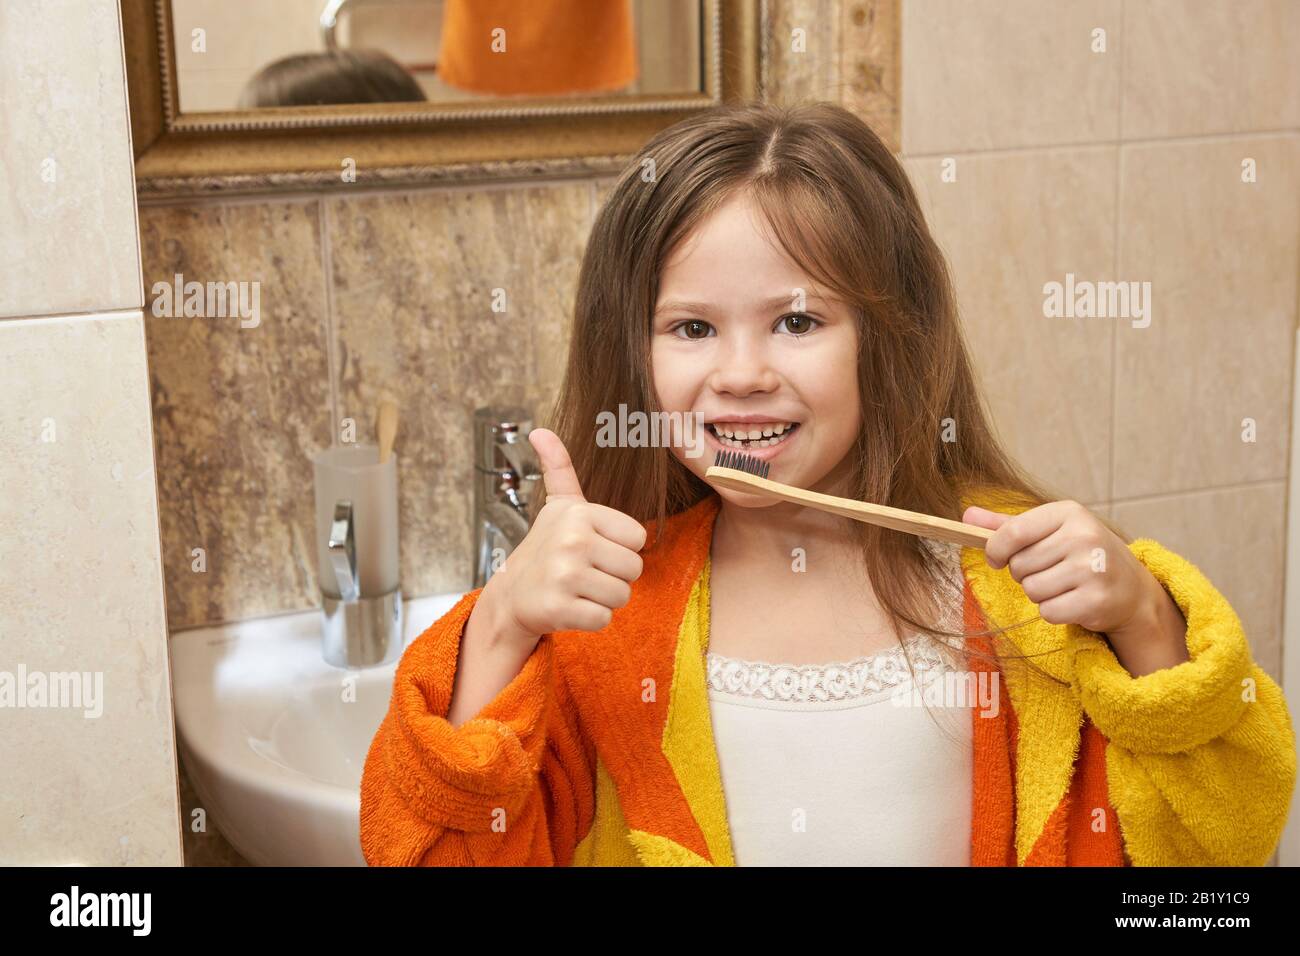 Young girl dental care. Child wash teeth Stock Photo